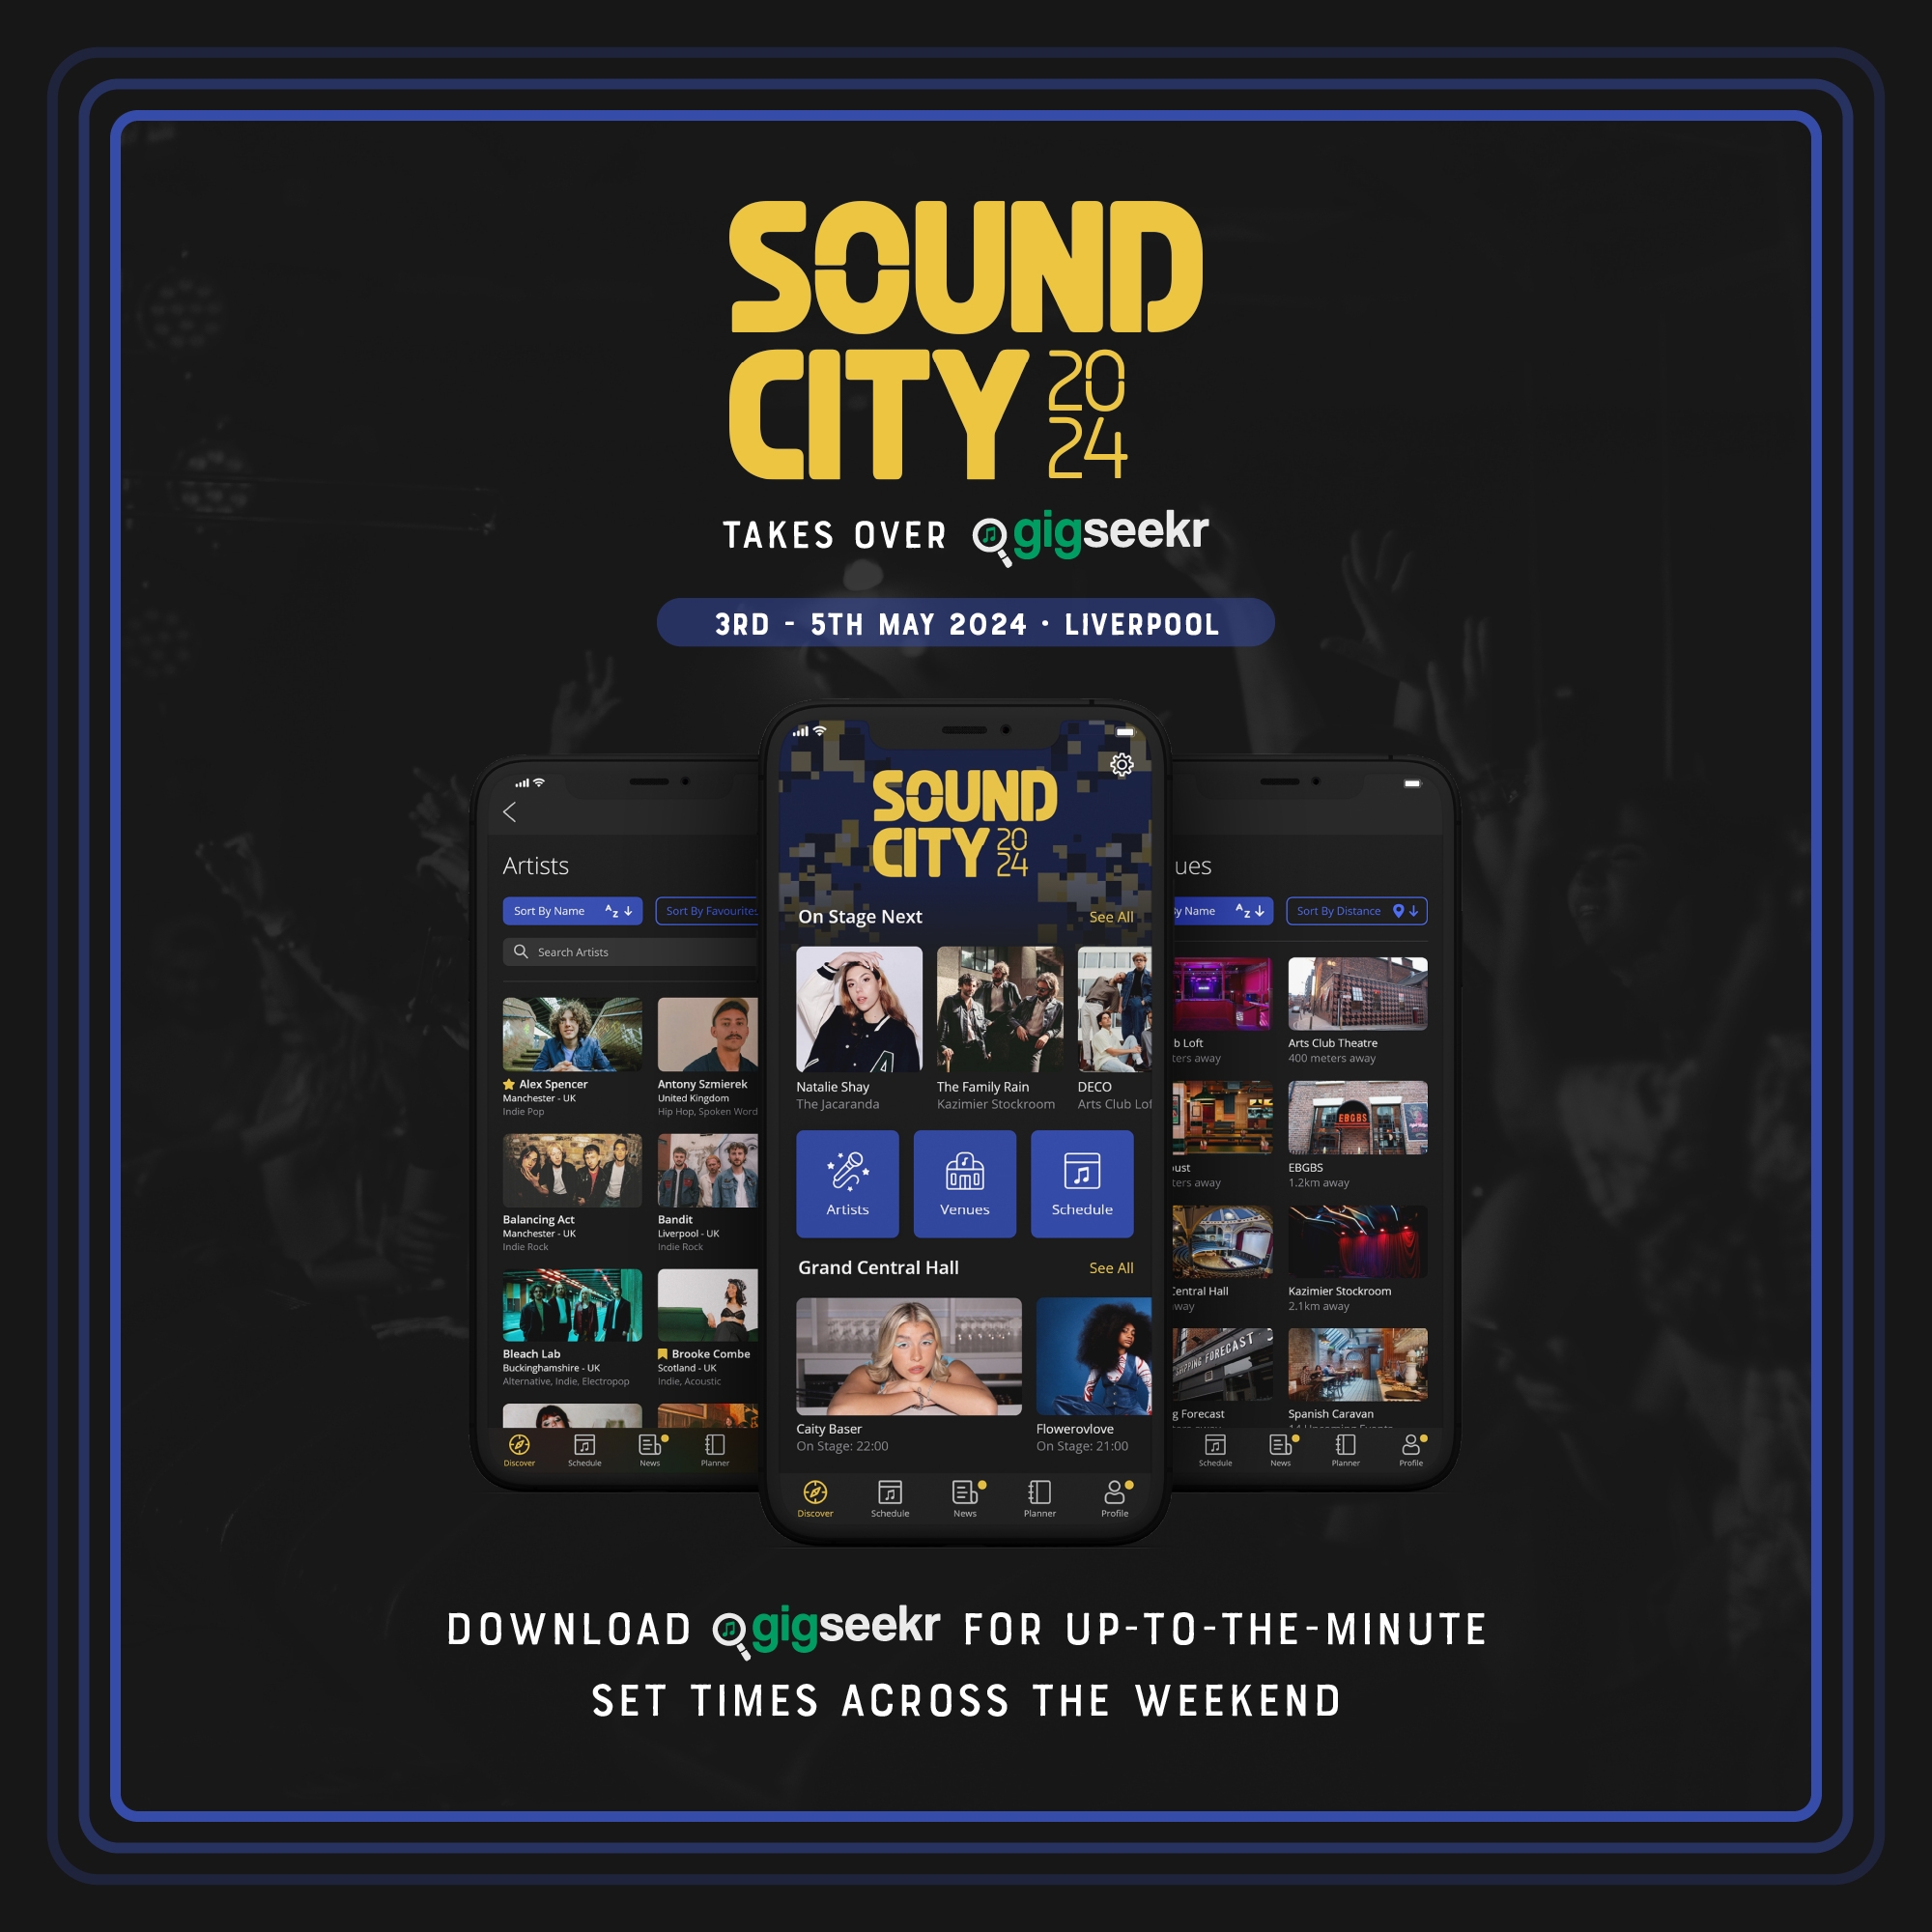 The official Sound City takeover is now live on Gigseekr!